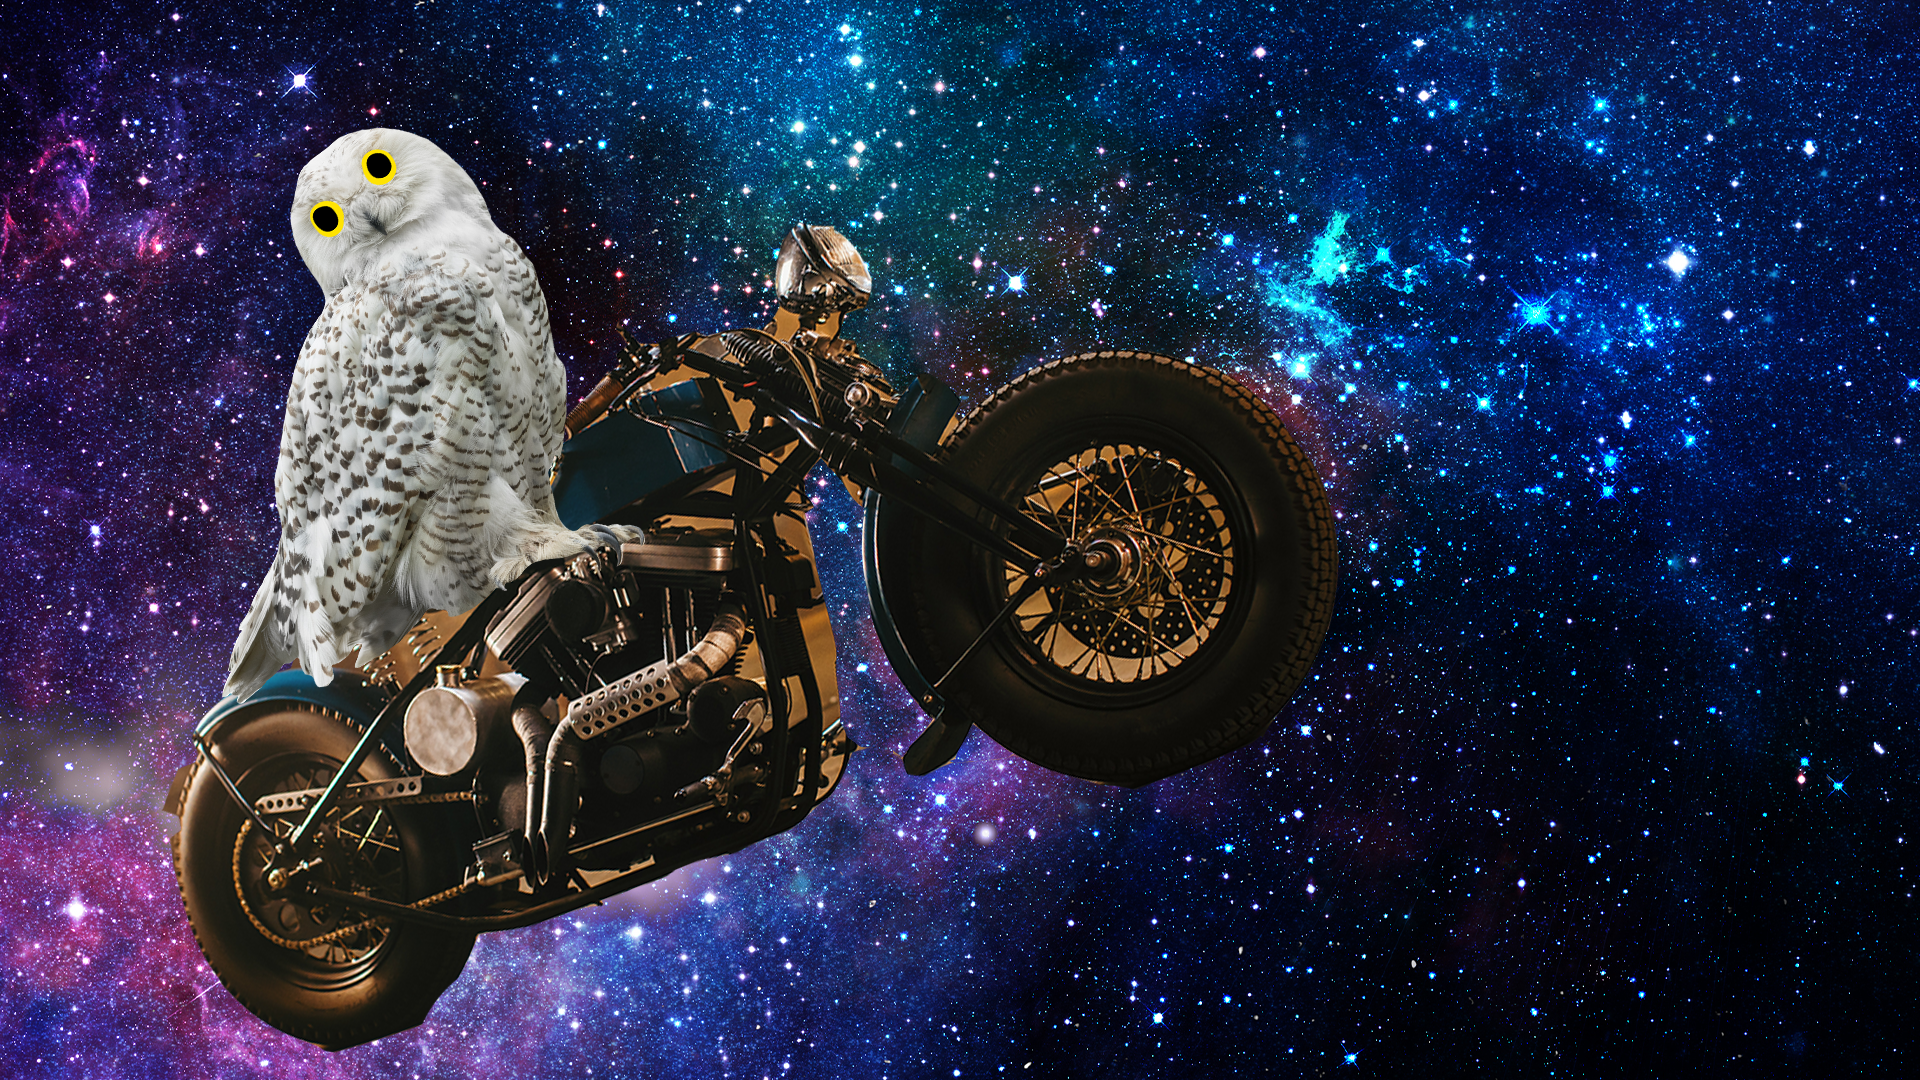 Hedwig riding a flying motorbike through the starry sky